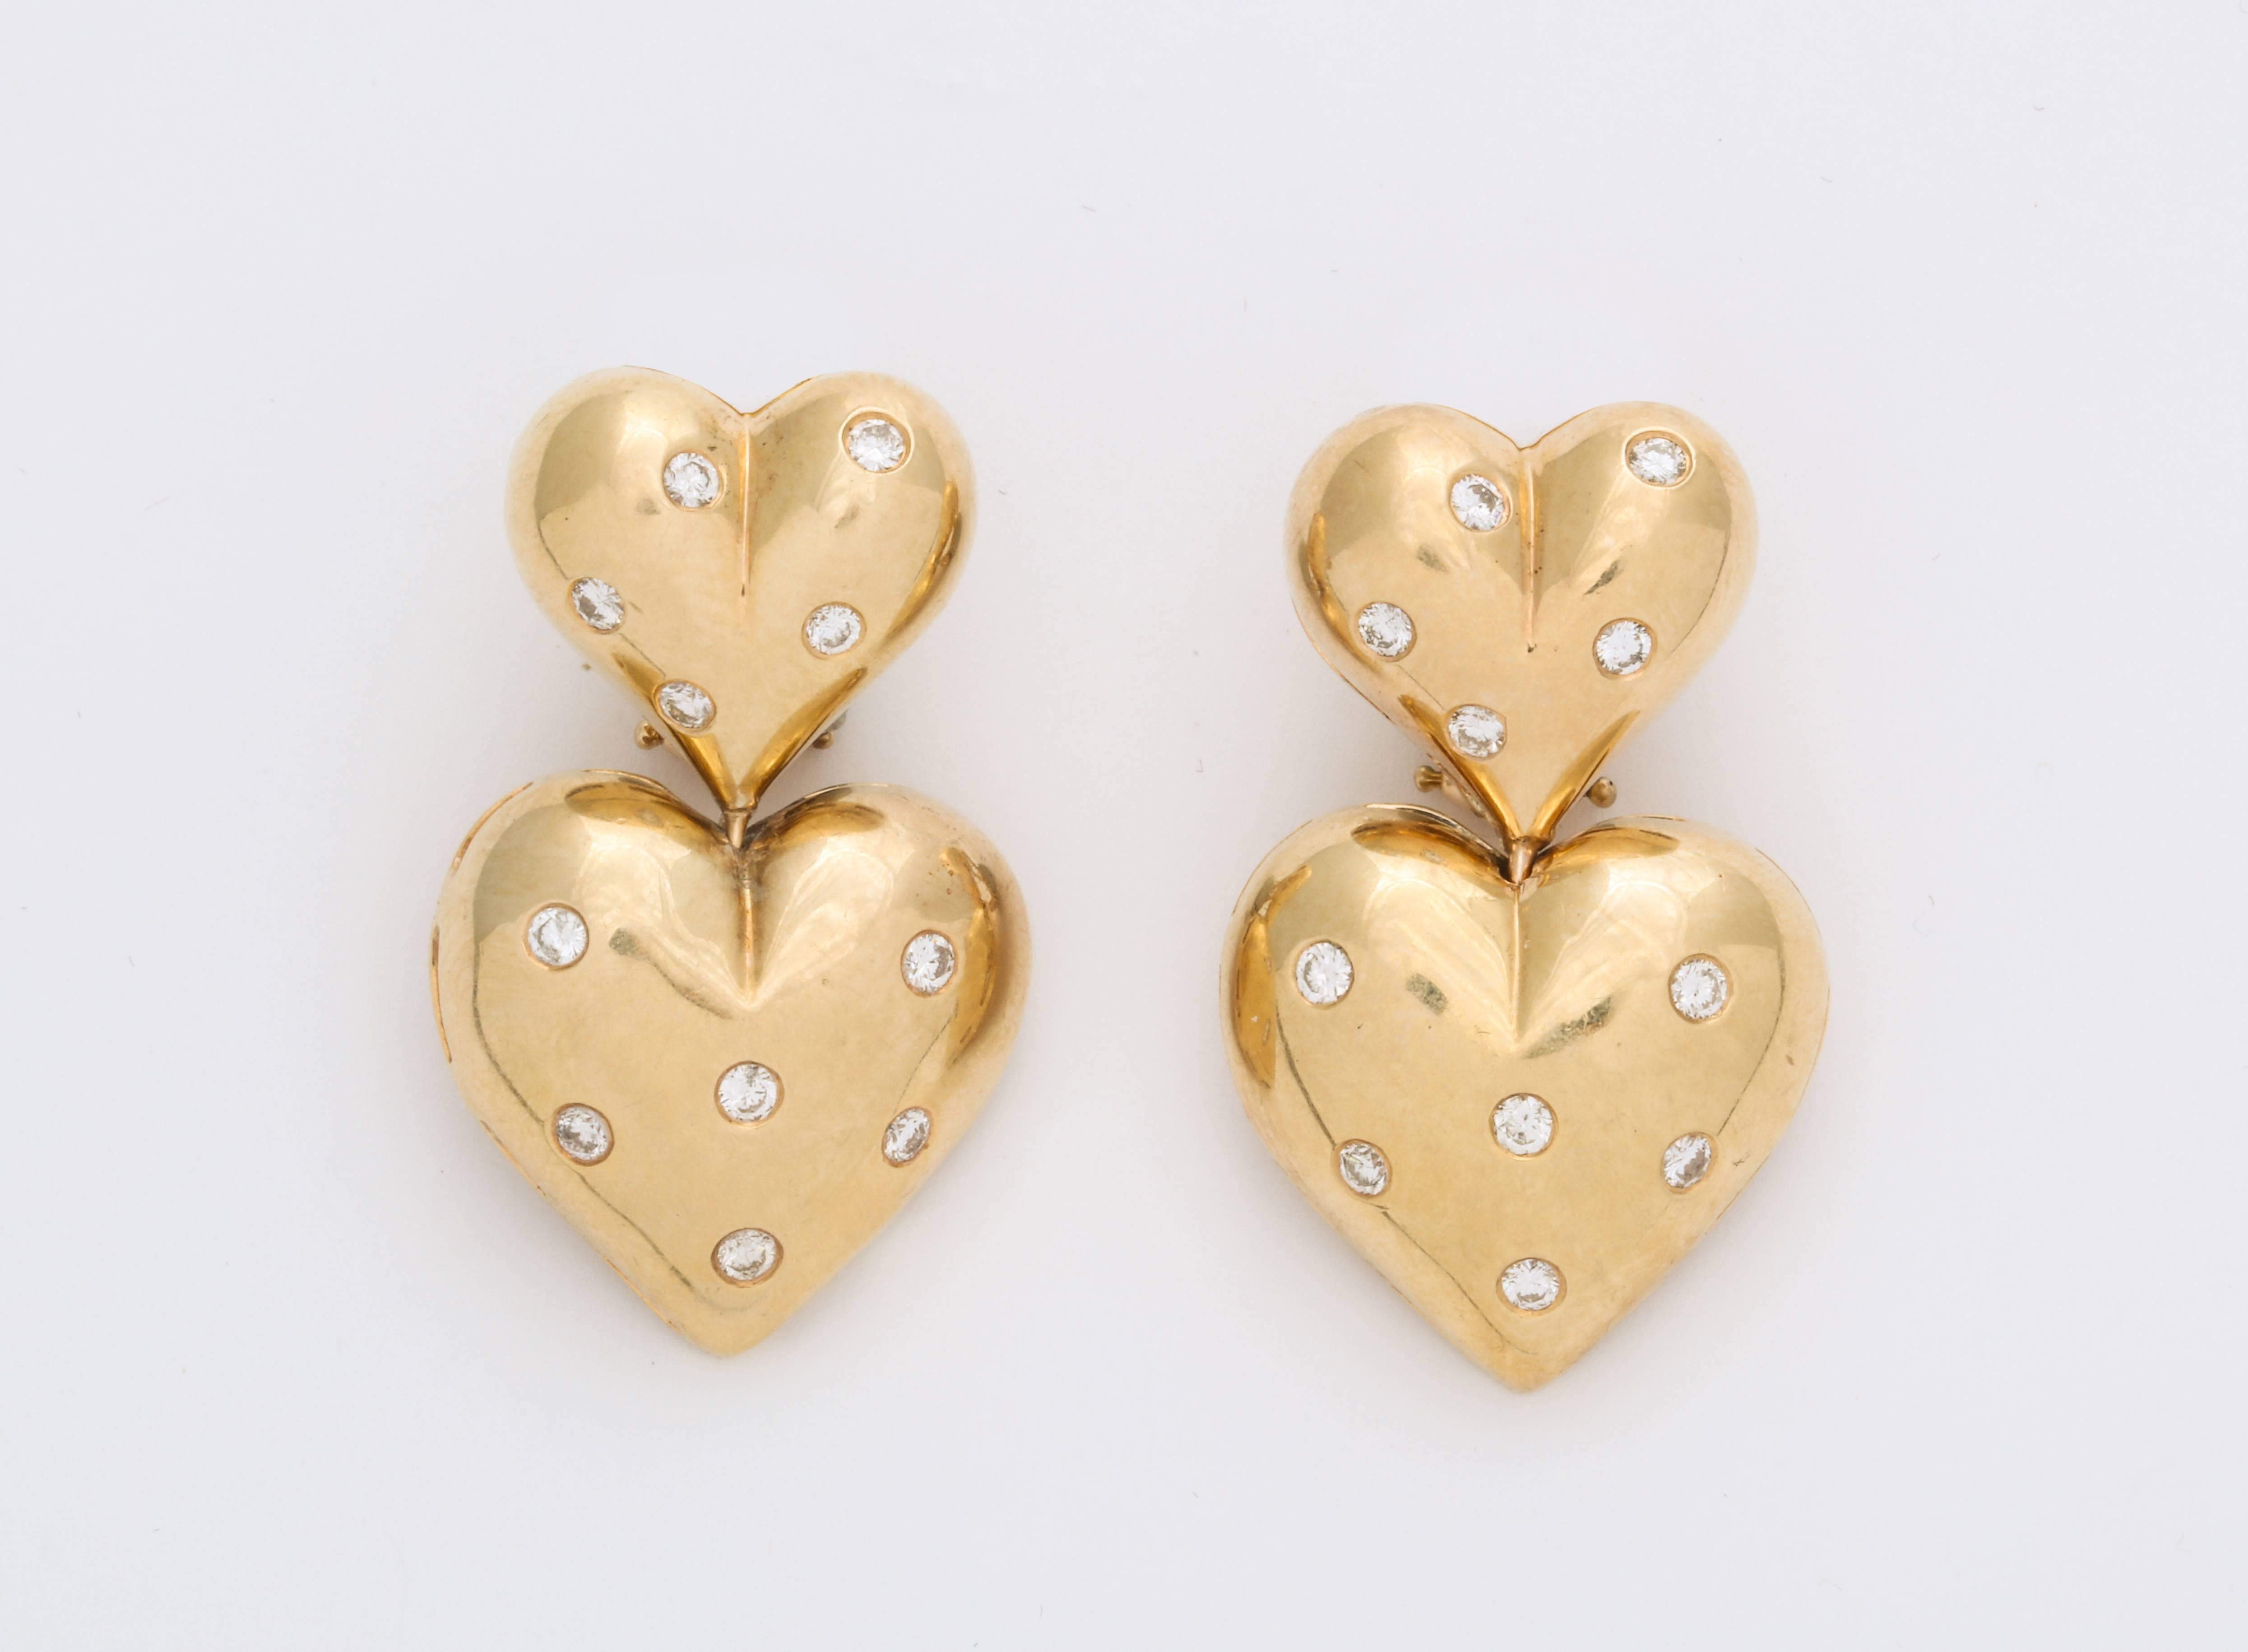 A wonderful pair of twin hearts in 14Kt gold and studded with diamonds signed by Michael Gates